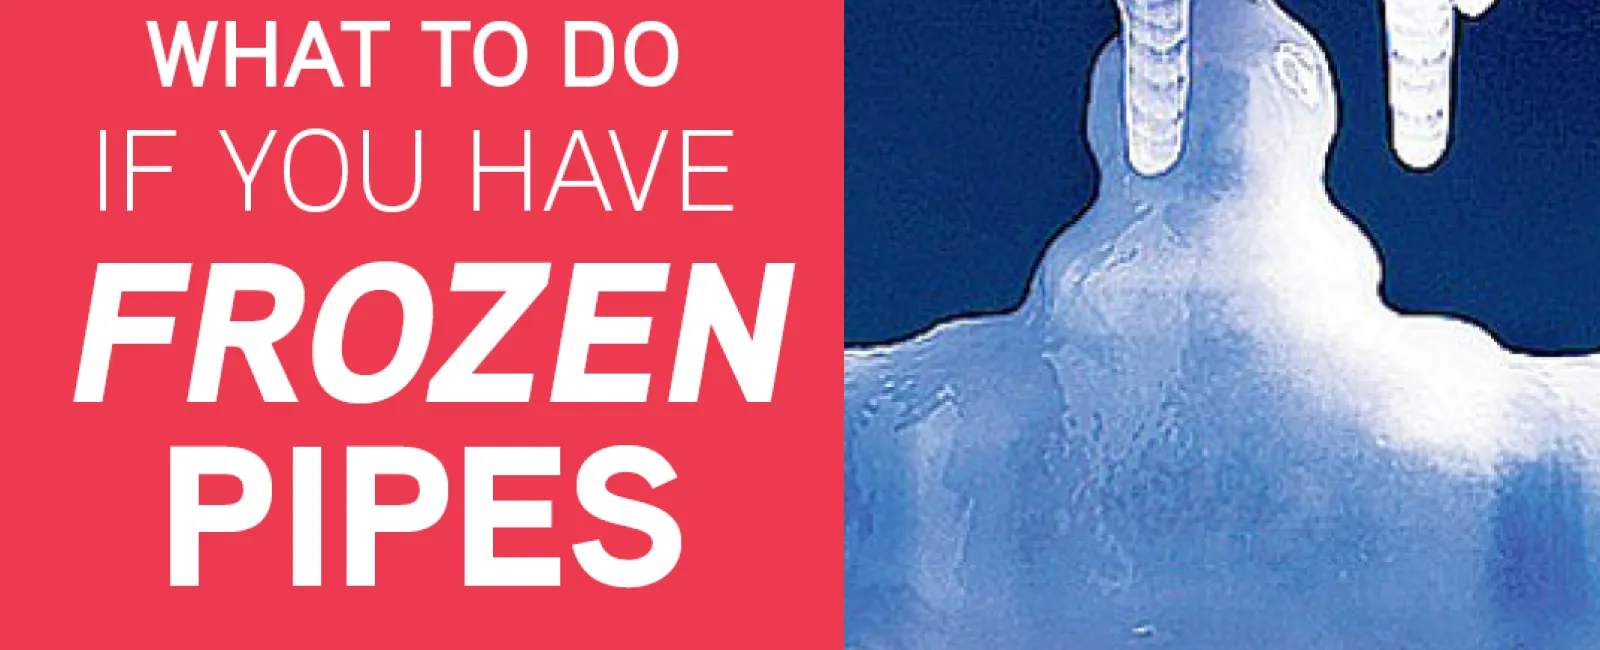 What to Do If You Have Frozen Pipes